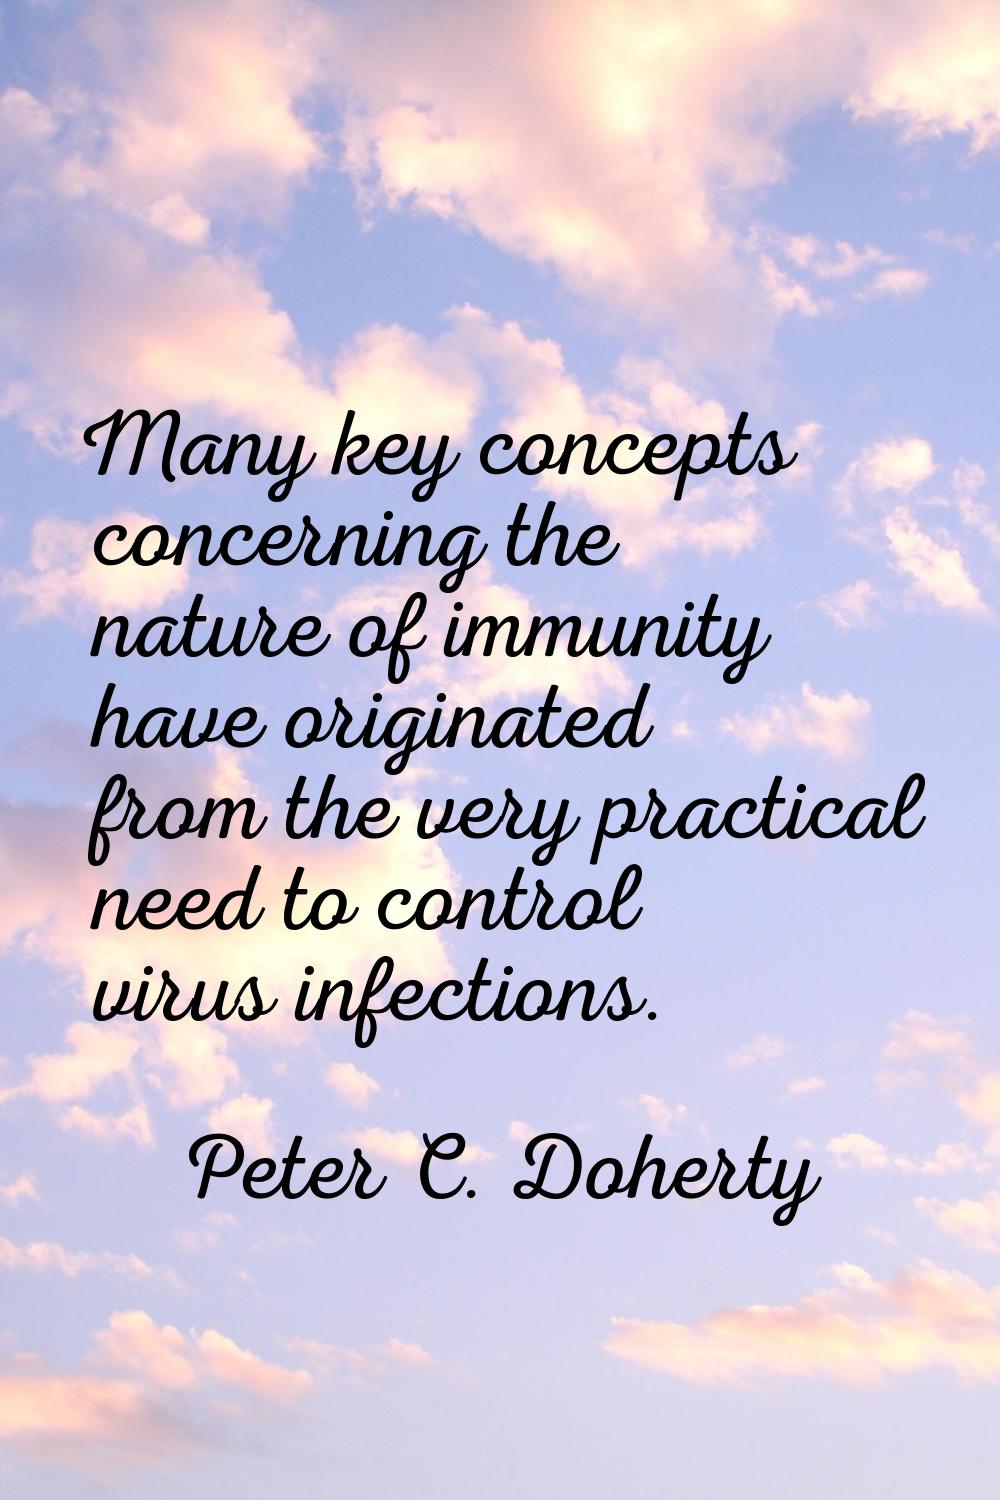 Many key concepts concerning the nature of immunity have originated from the very practical need to